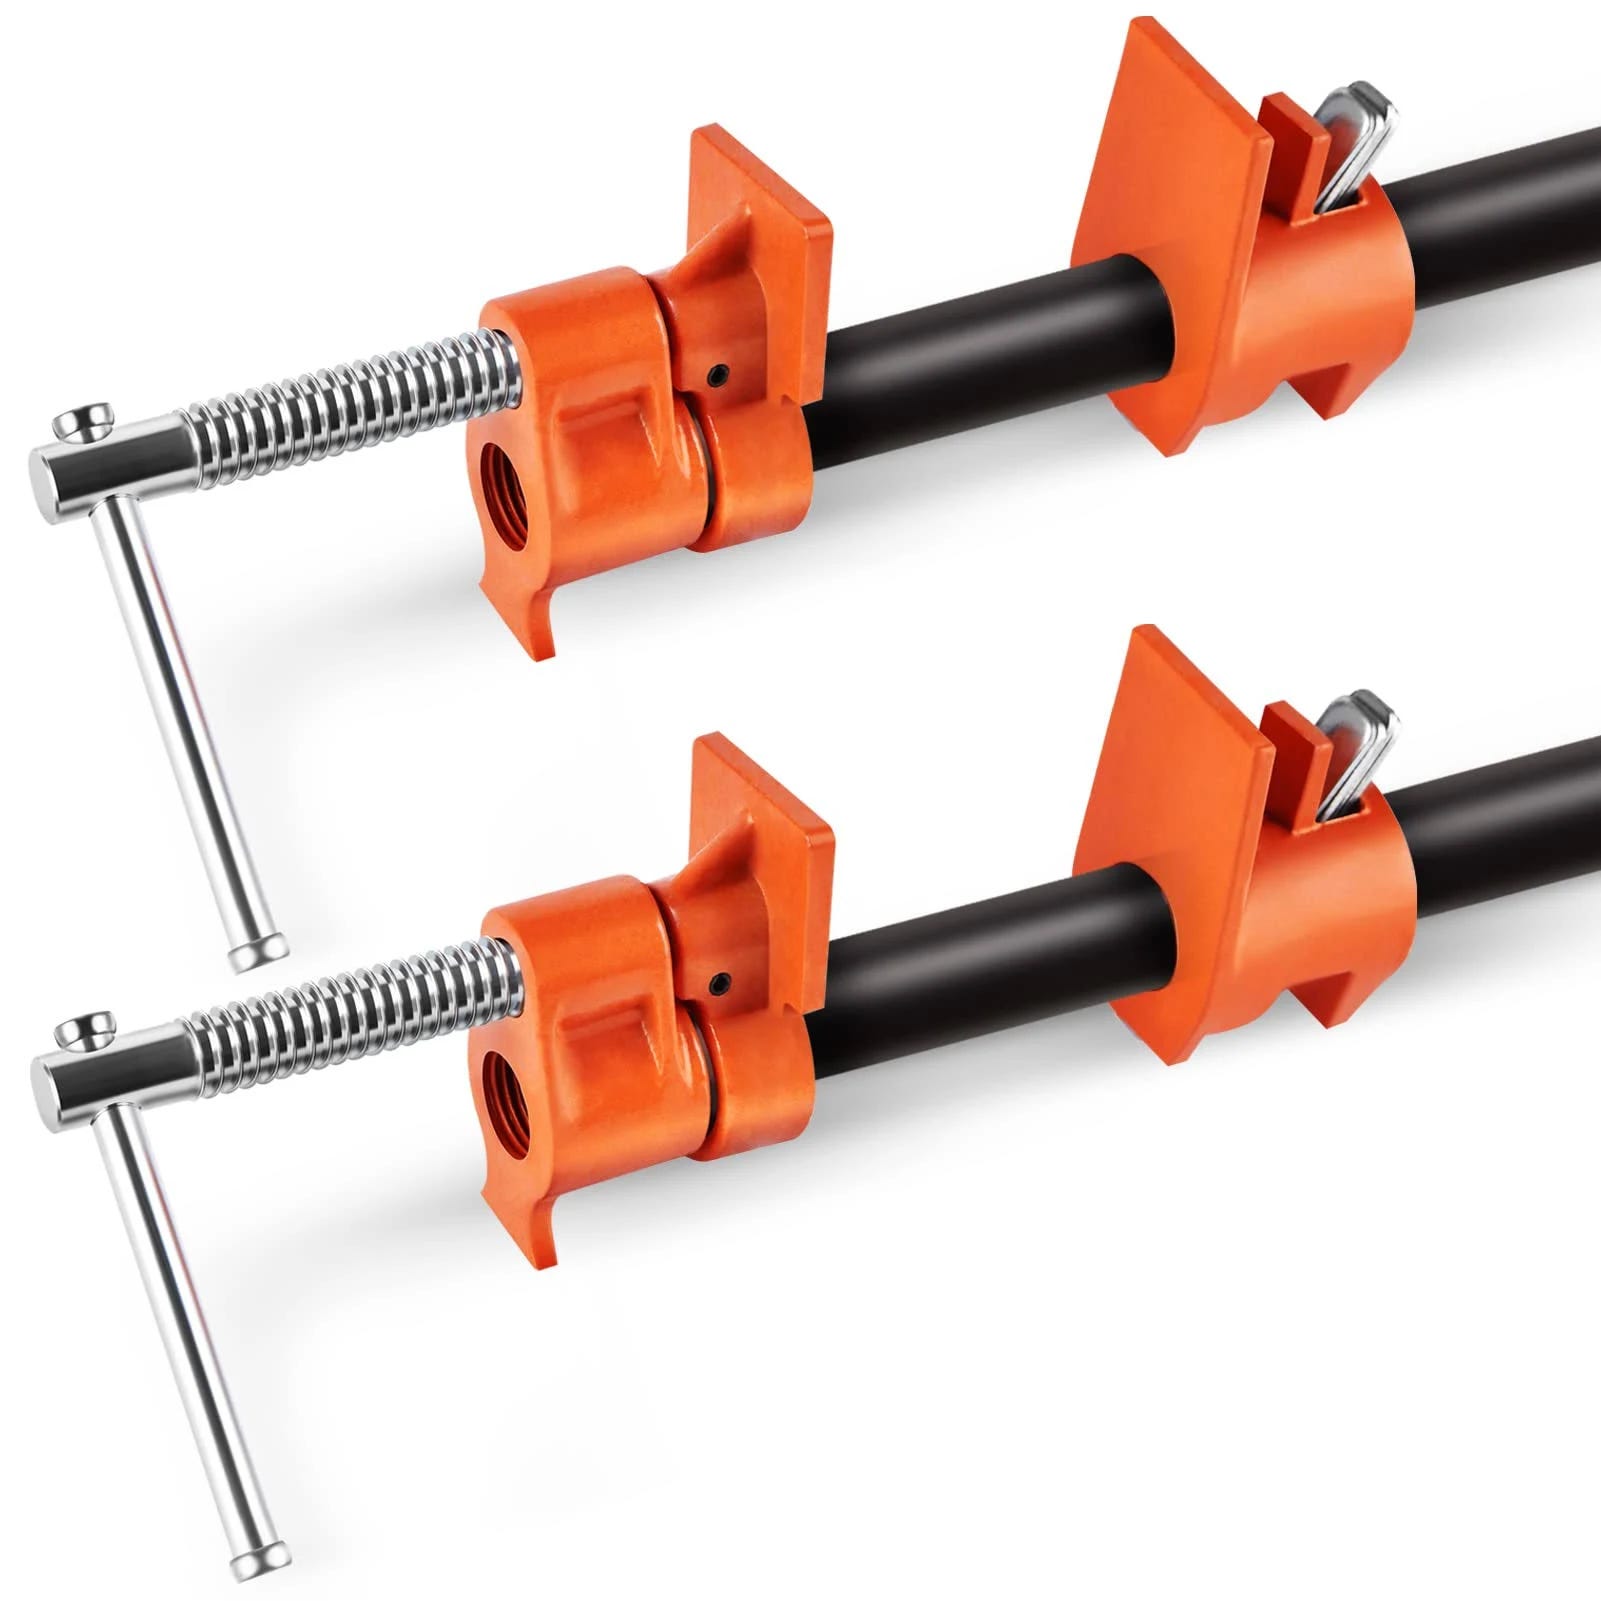 Efficient and Adjustable 1/2-inch Pipe Clamps Set - Black Stainless Steel and Ergonomic Orange Handle | Image